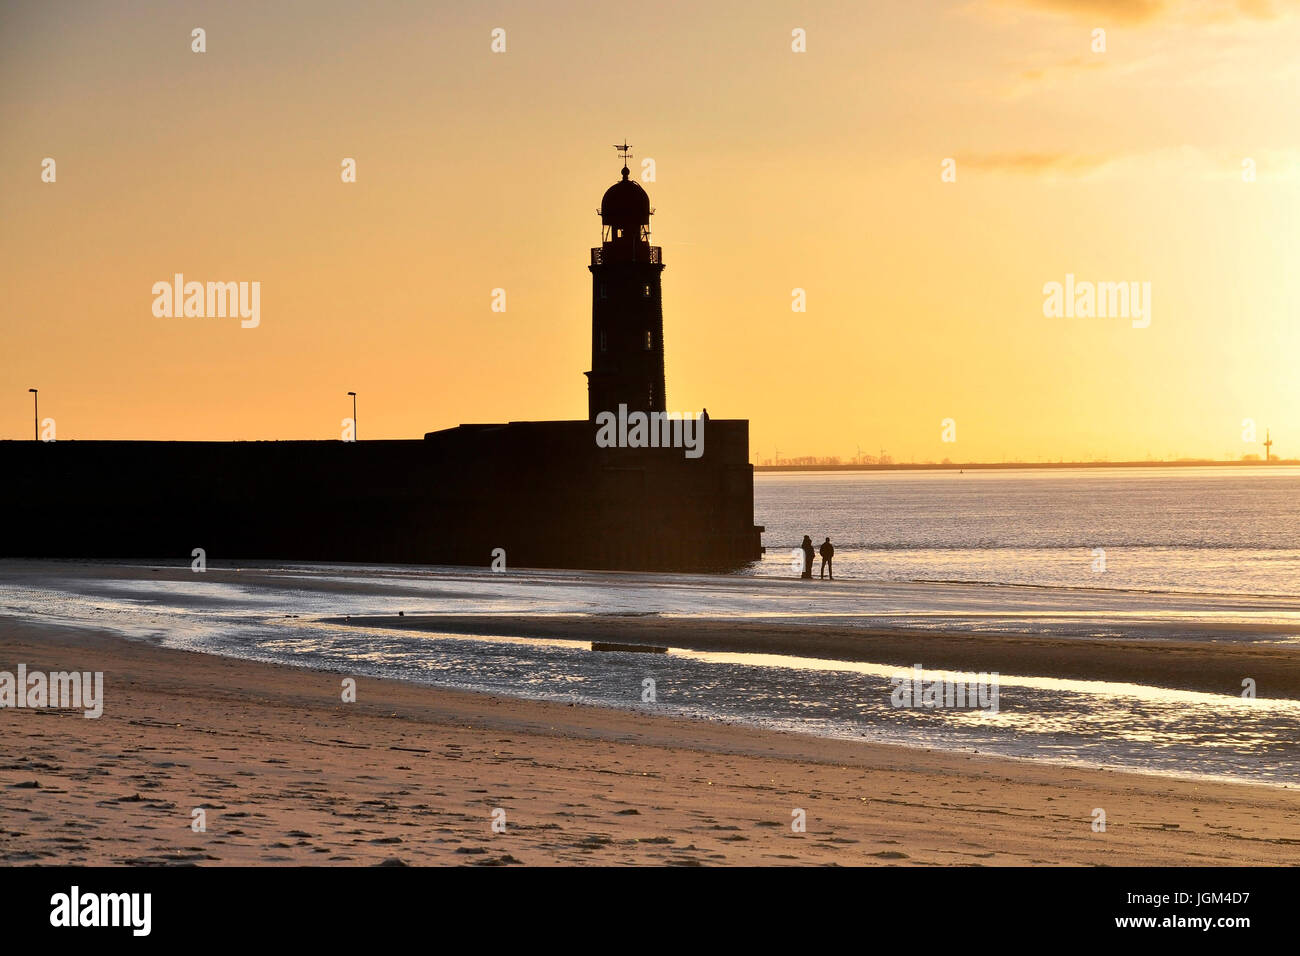 The Federal Republic of Germany, Bremerhaven, harbour mole, harbour, port entrance, signal tower, old lighthouse, lighthouse, sundown. Architecture, b Stock Photo